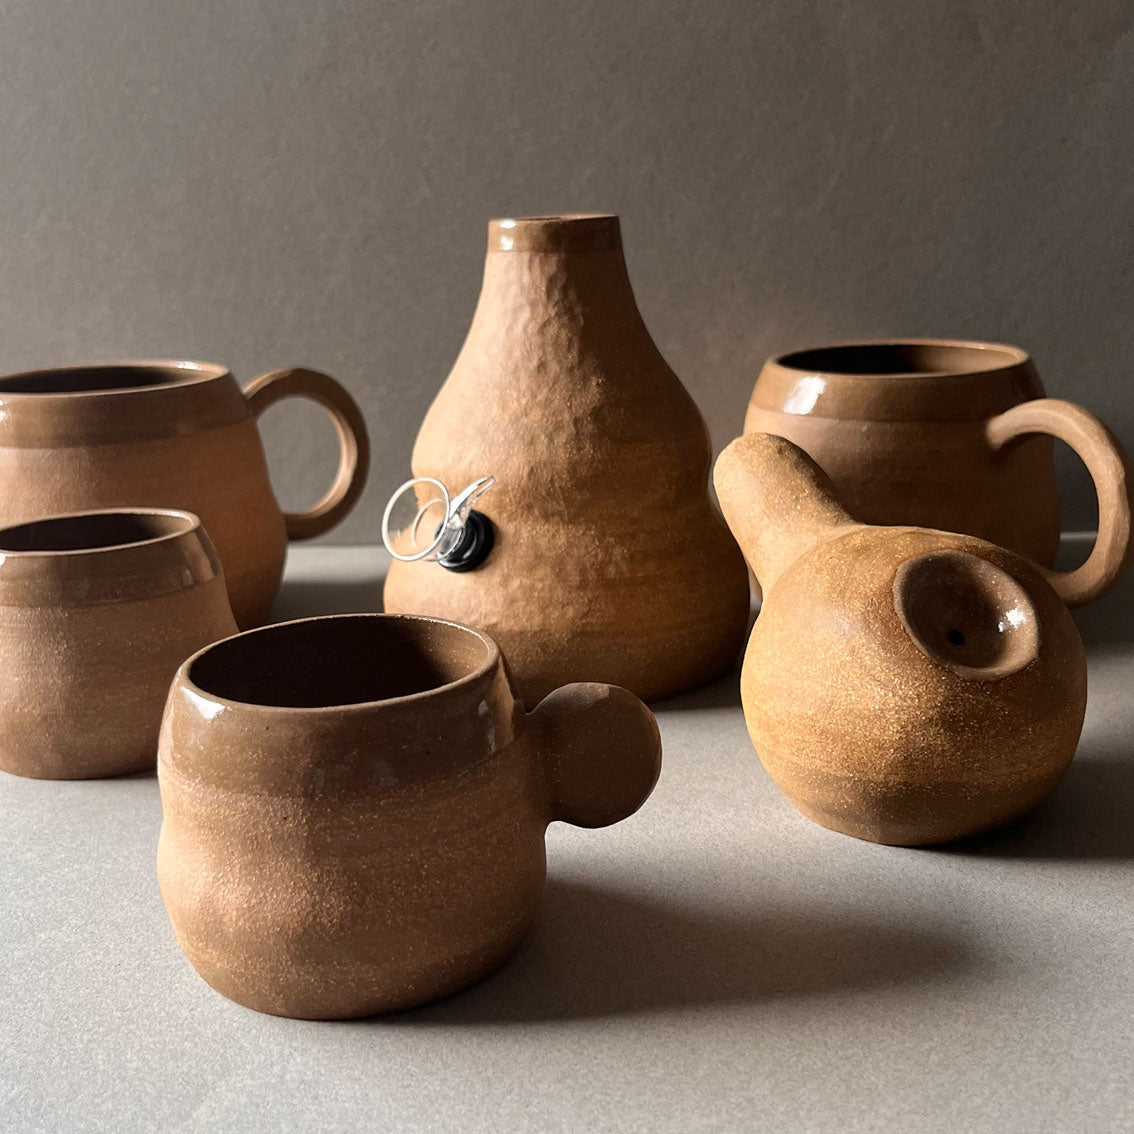 Terra Onda collection, brown clay bodies with hammered texture and clear glazed interiors. Mugs, Espresso cups, pipes and bongs